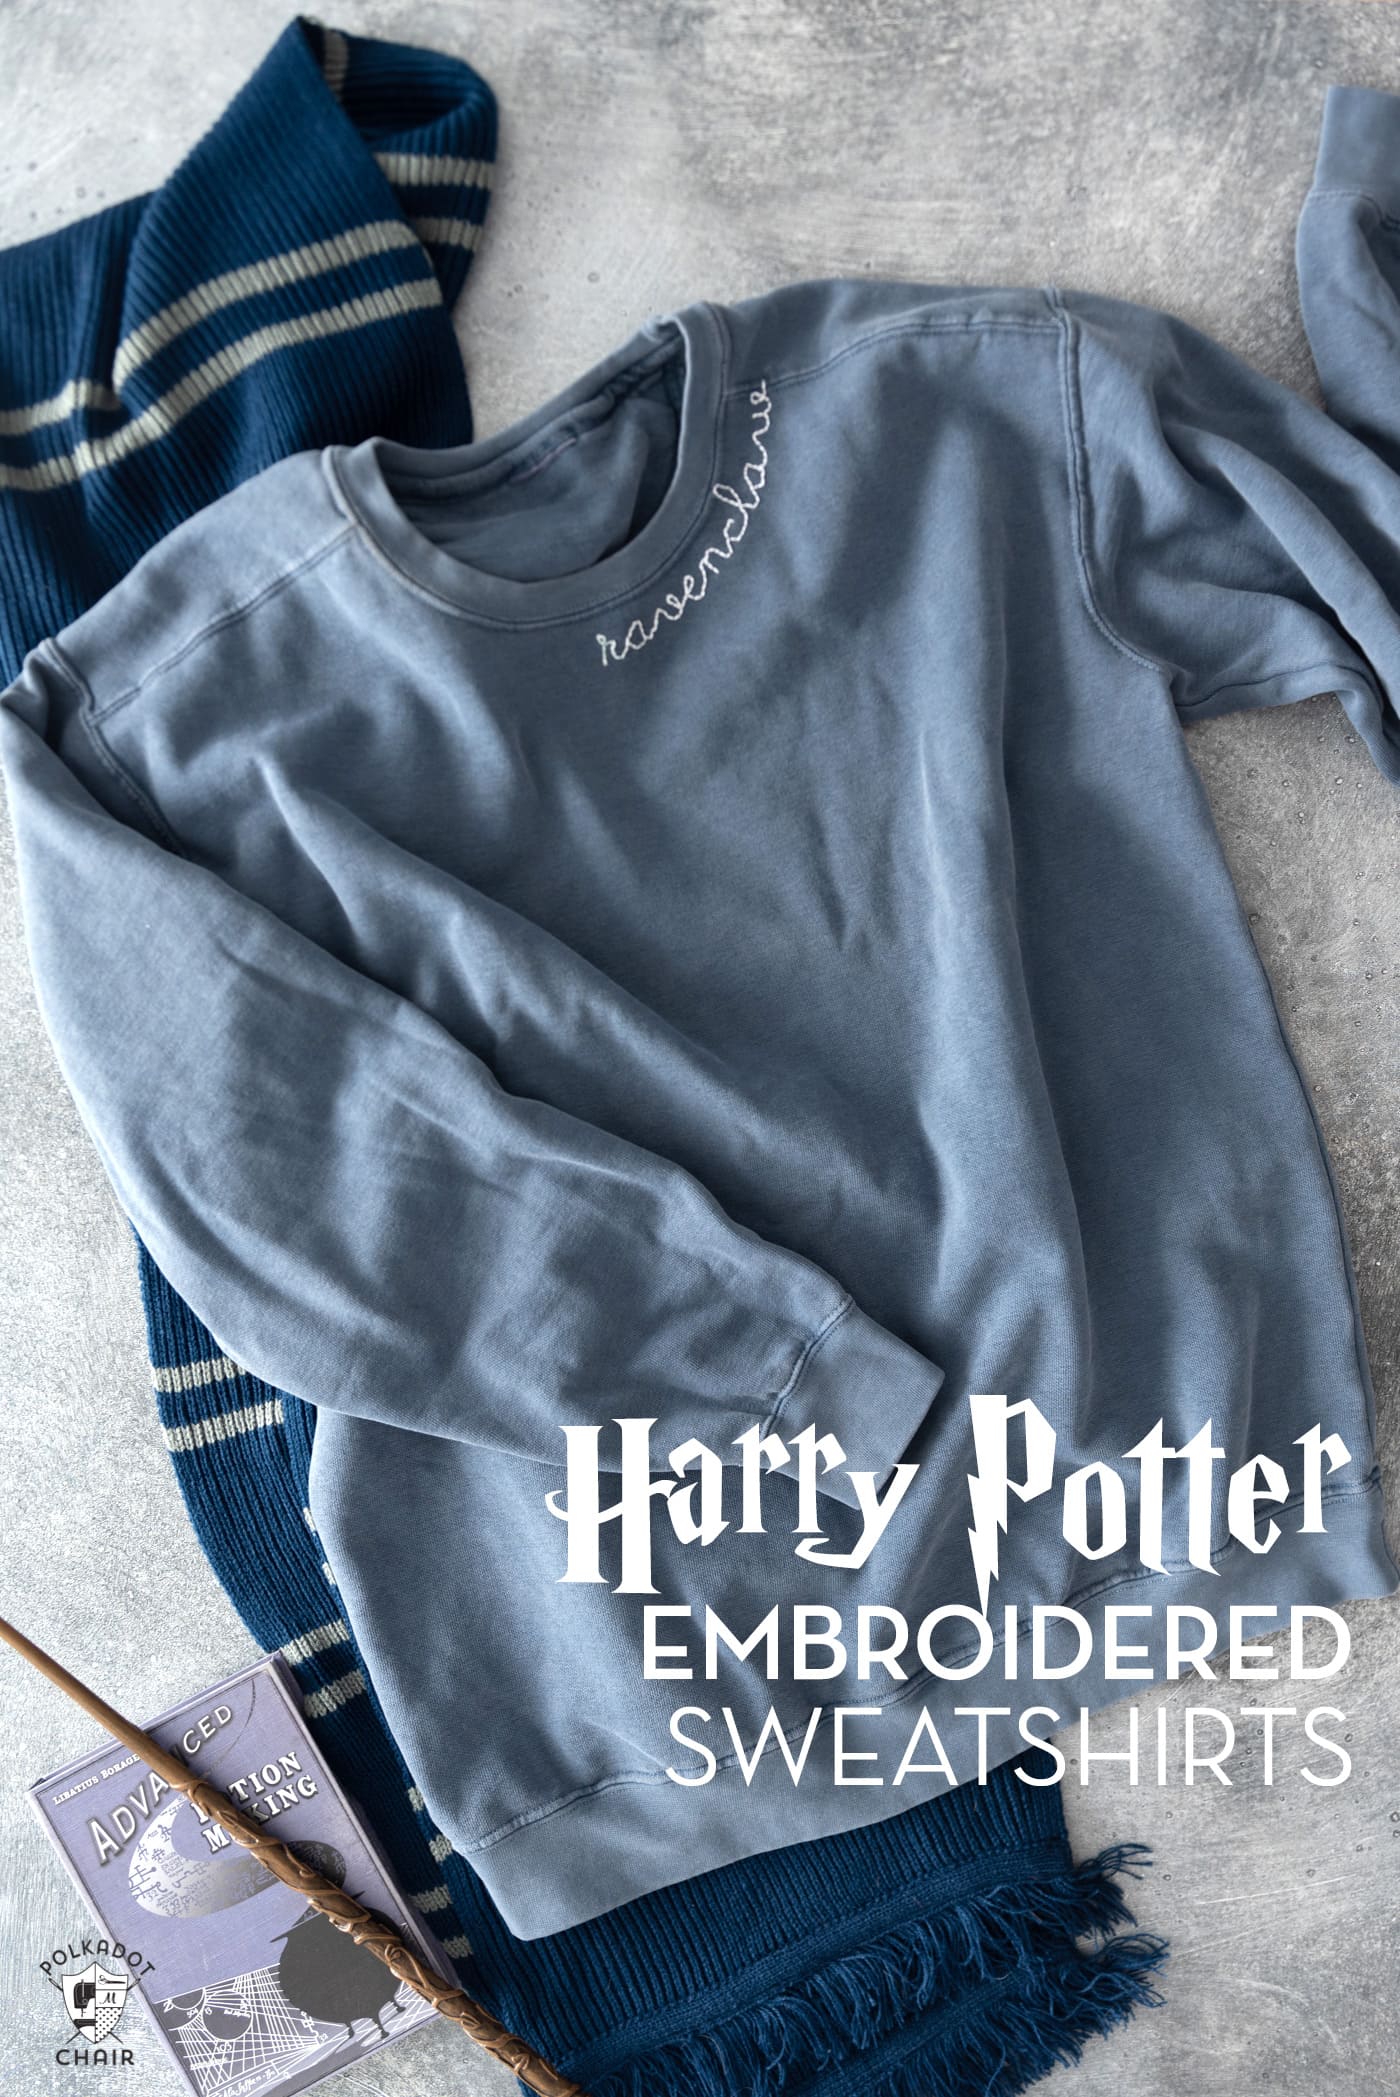 navy sweatshirt, navy and gray scraf and book on gray tabletop